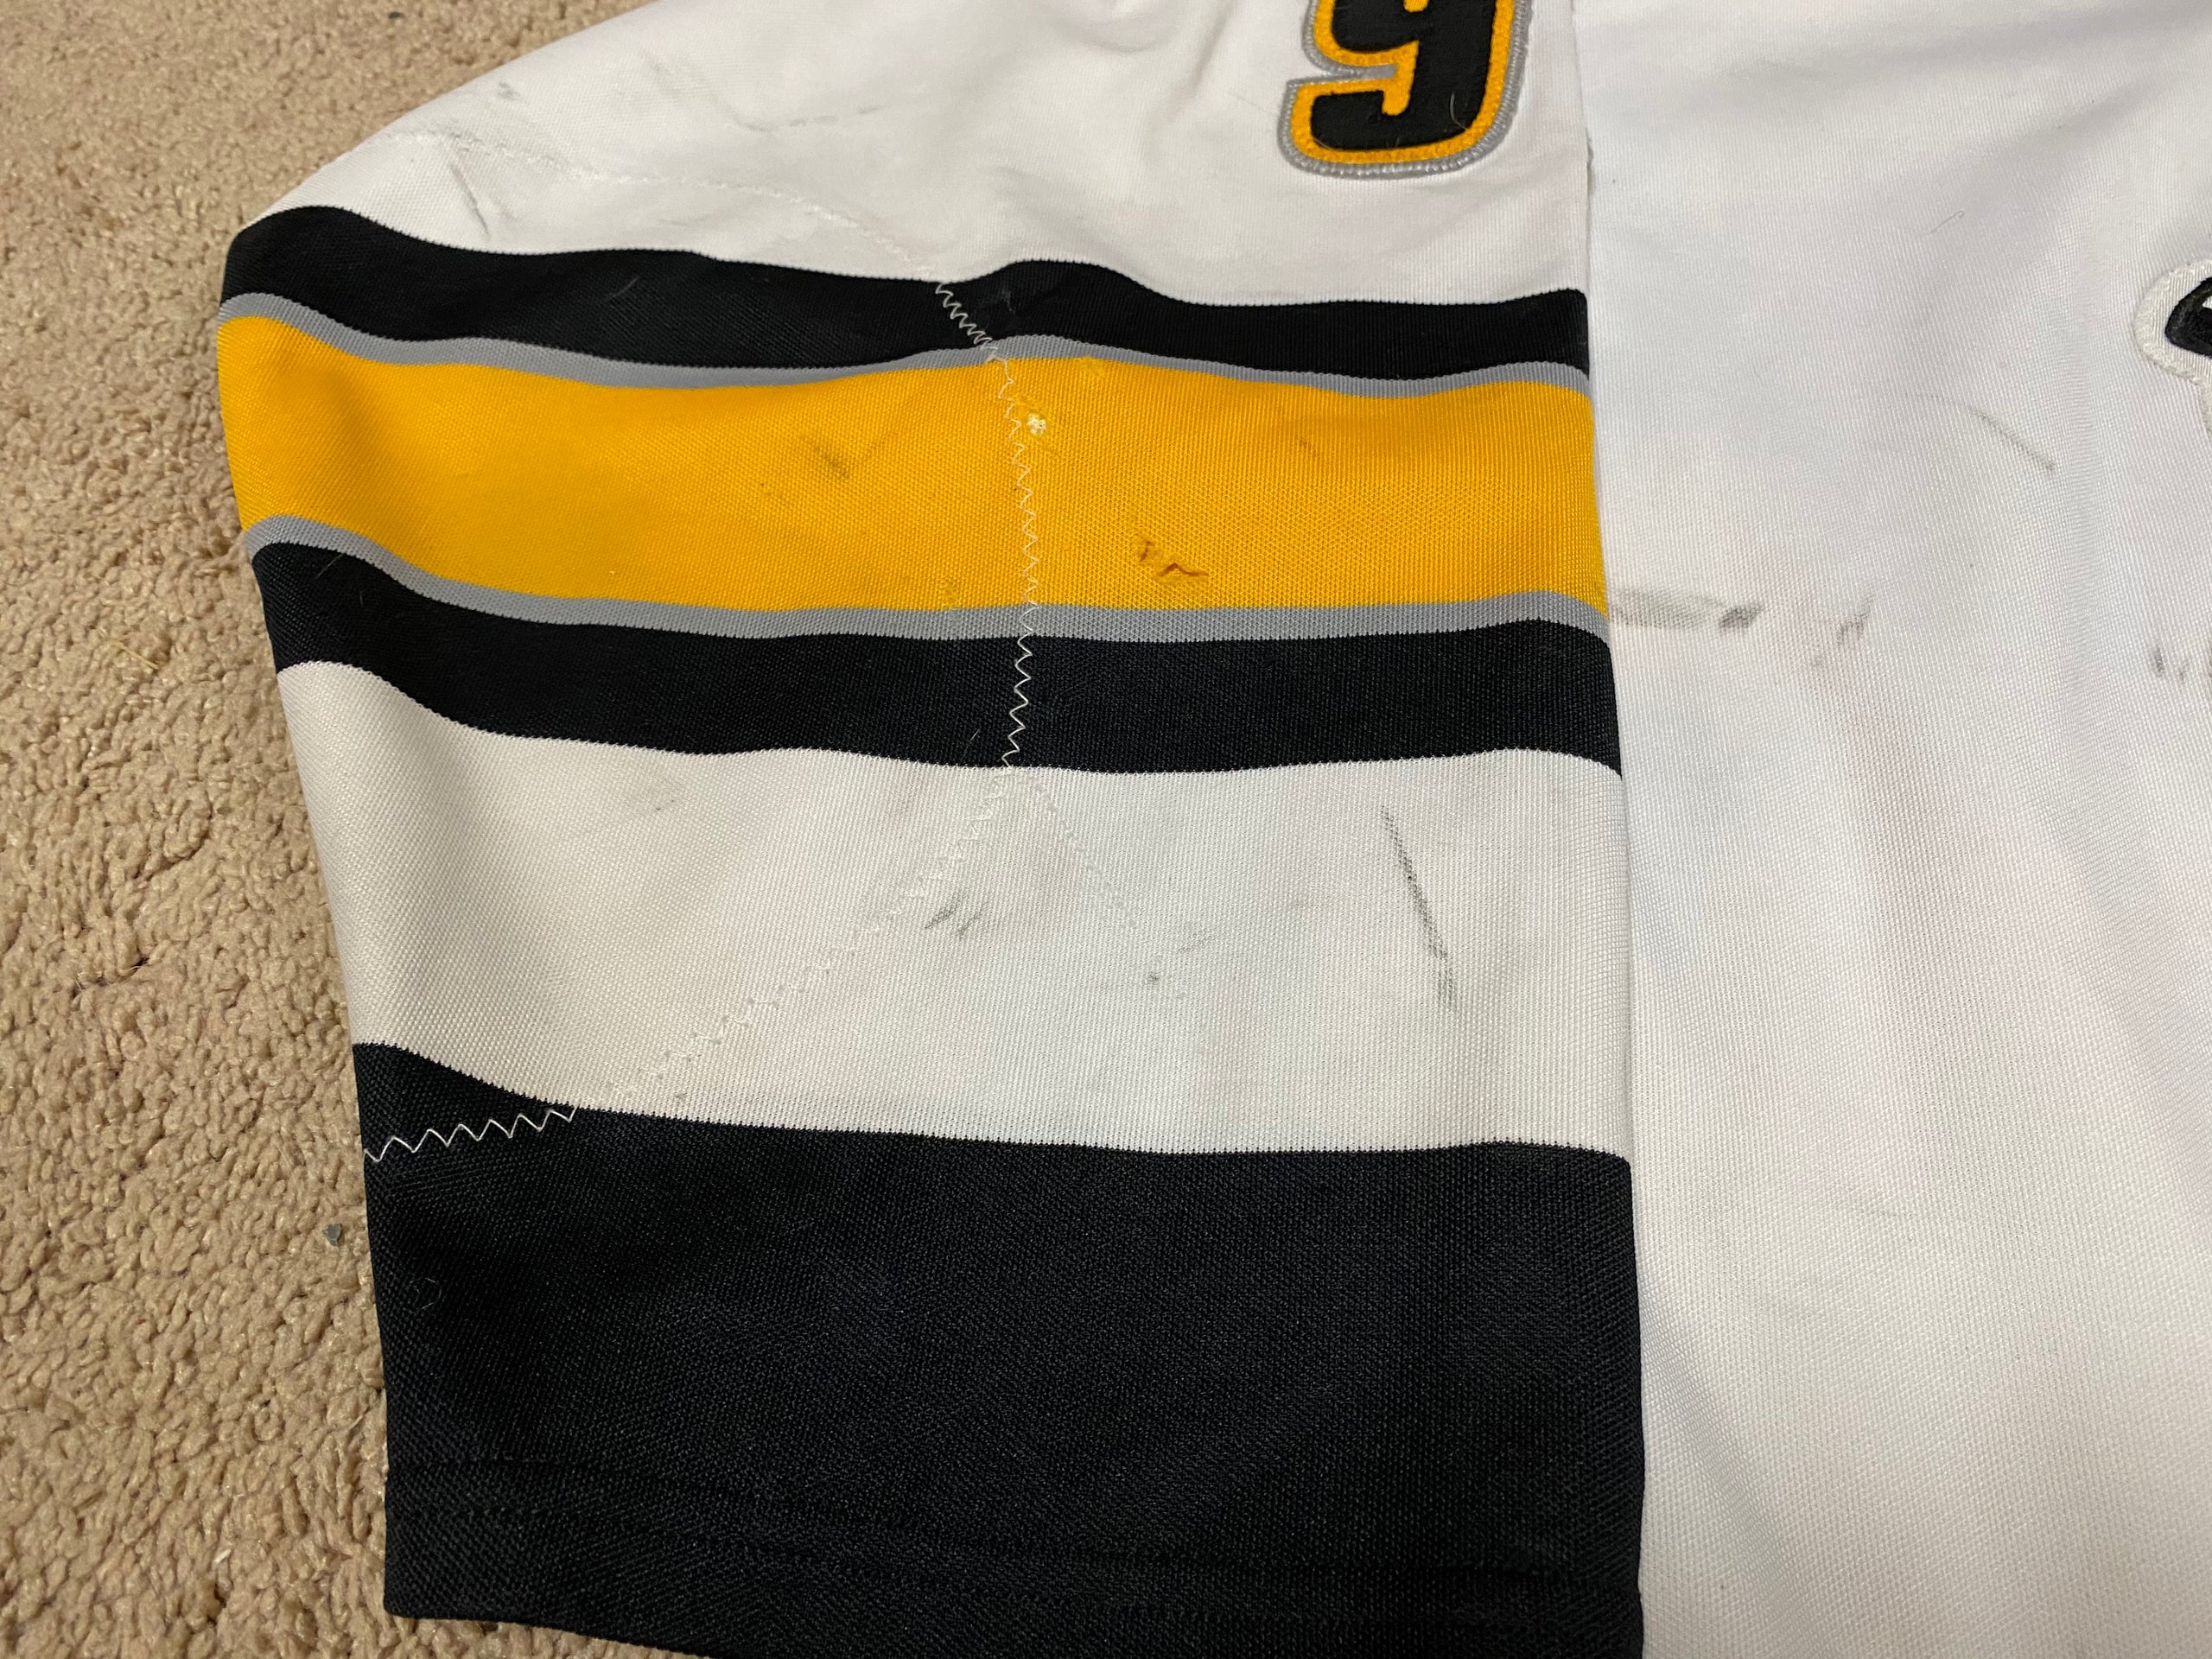 Sting to Release Remaining Tickets to Steven Stamkos Jersey Retirement  Night - Sarnia Sting